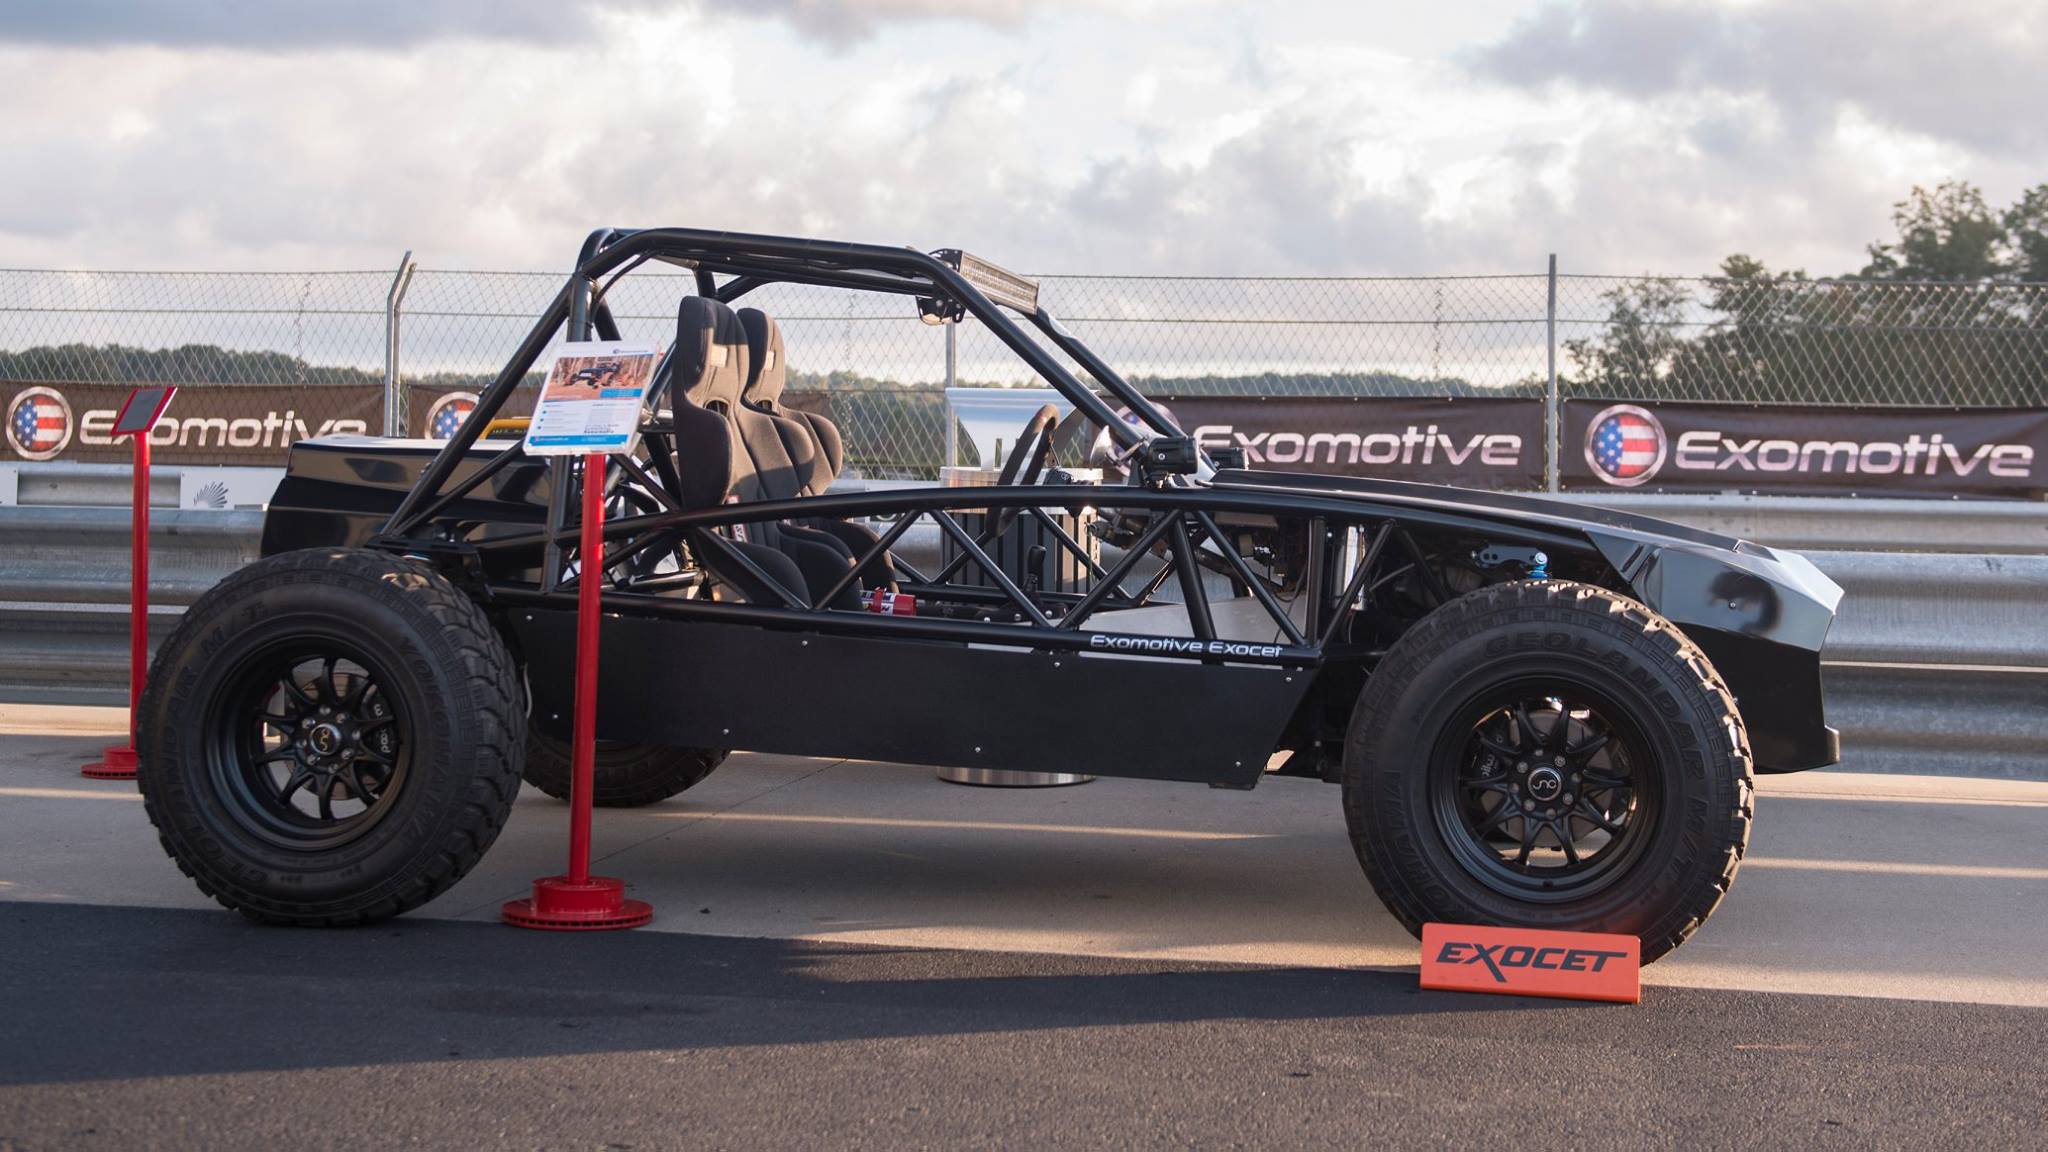 The extremely versatile Exocet Off-Road